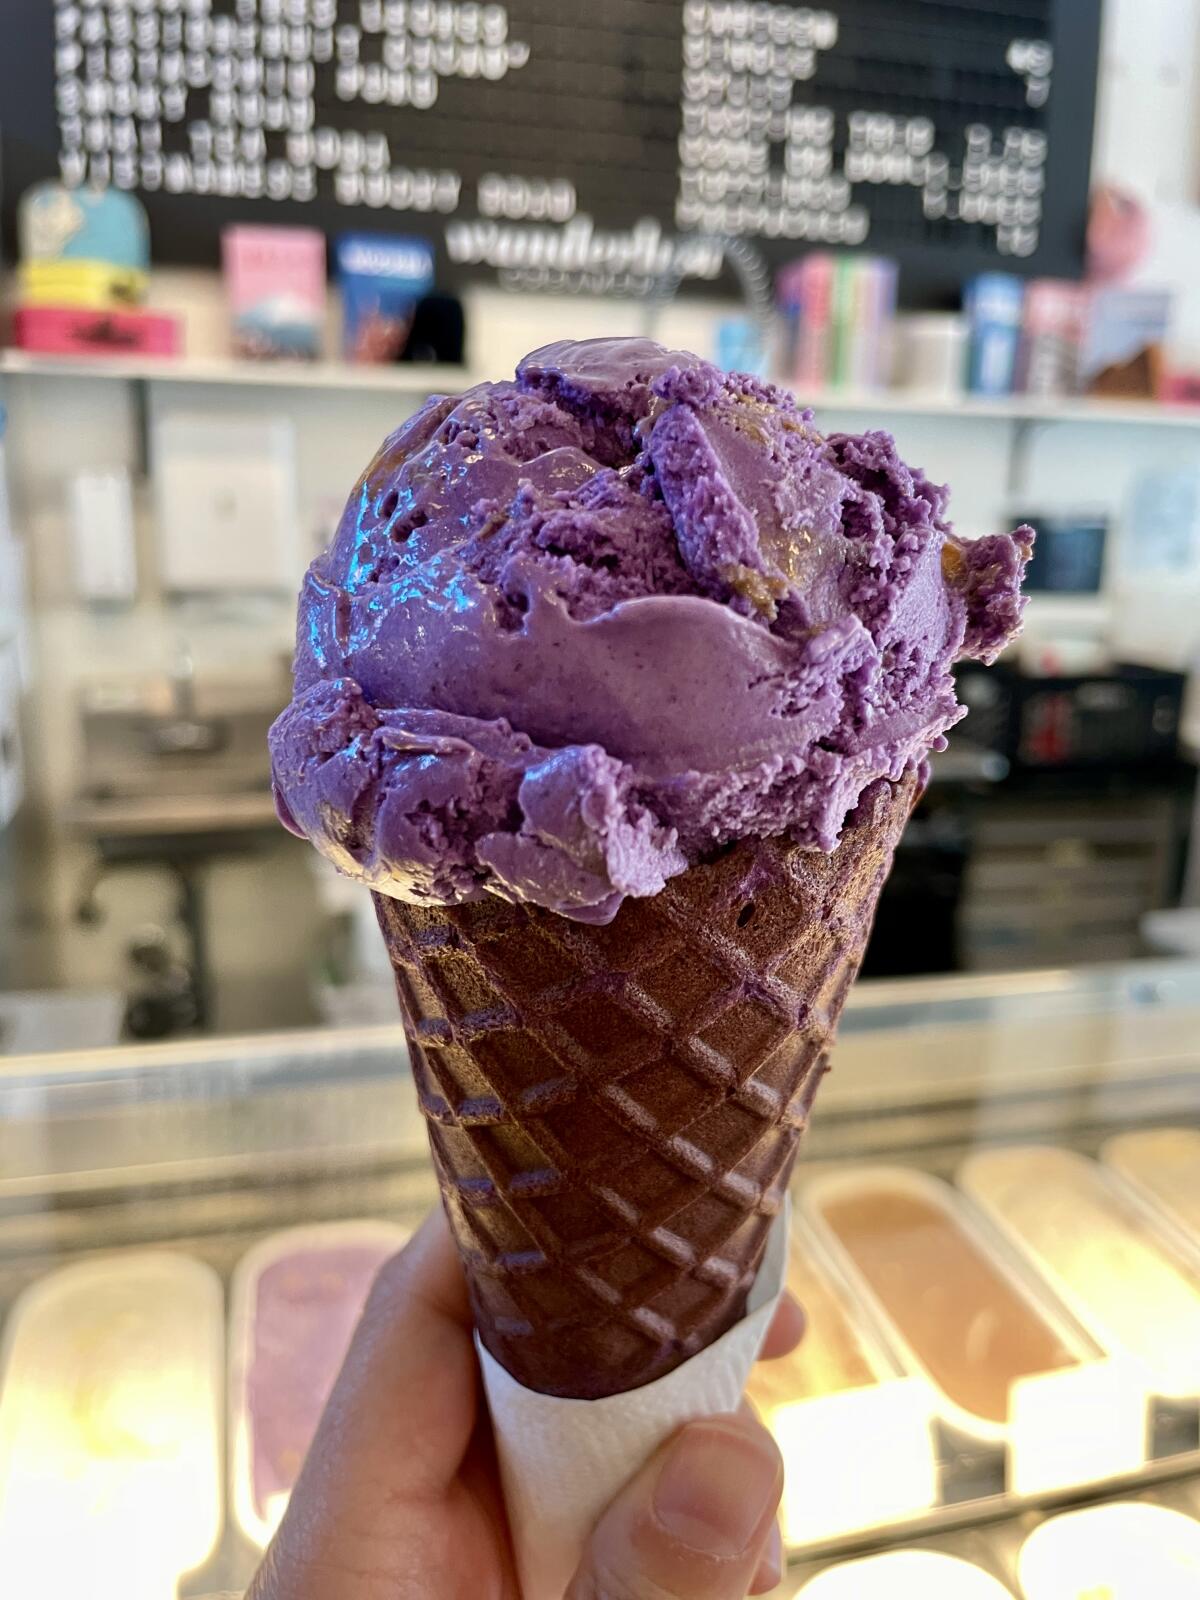 A hand holds up a scoop of purple ice cream in a purple-tinged cone